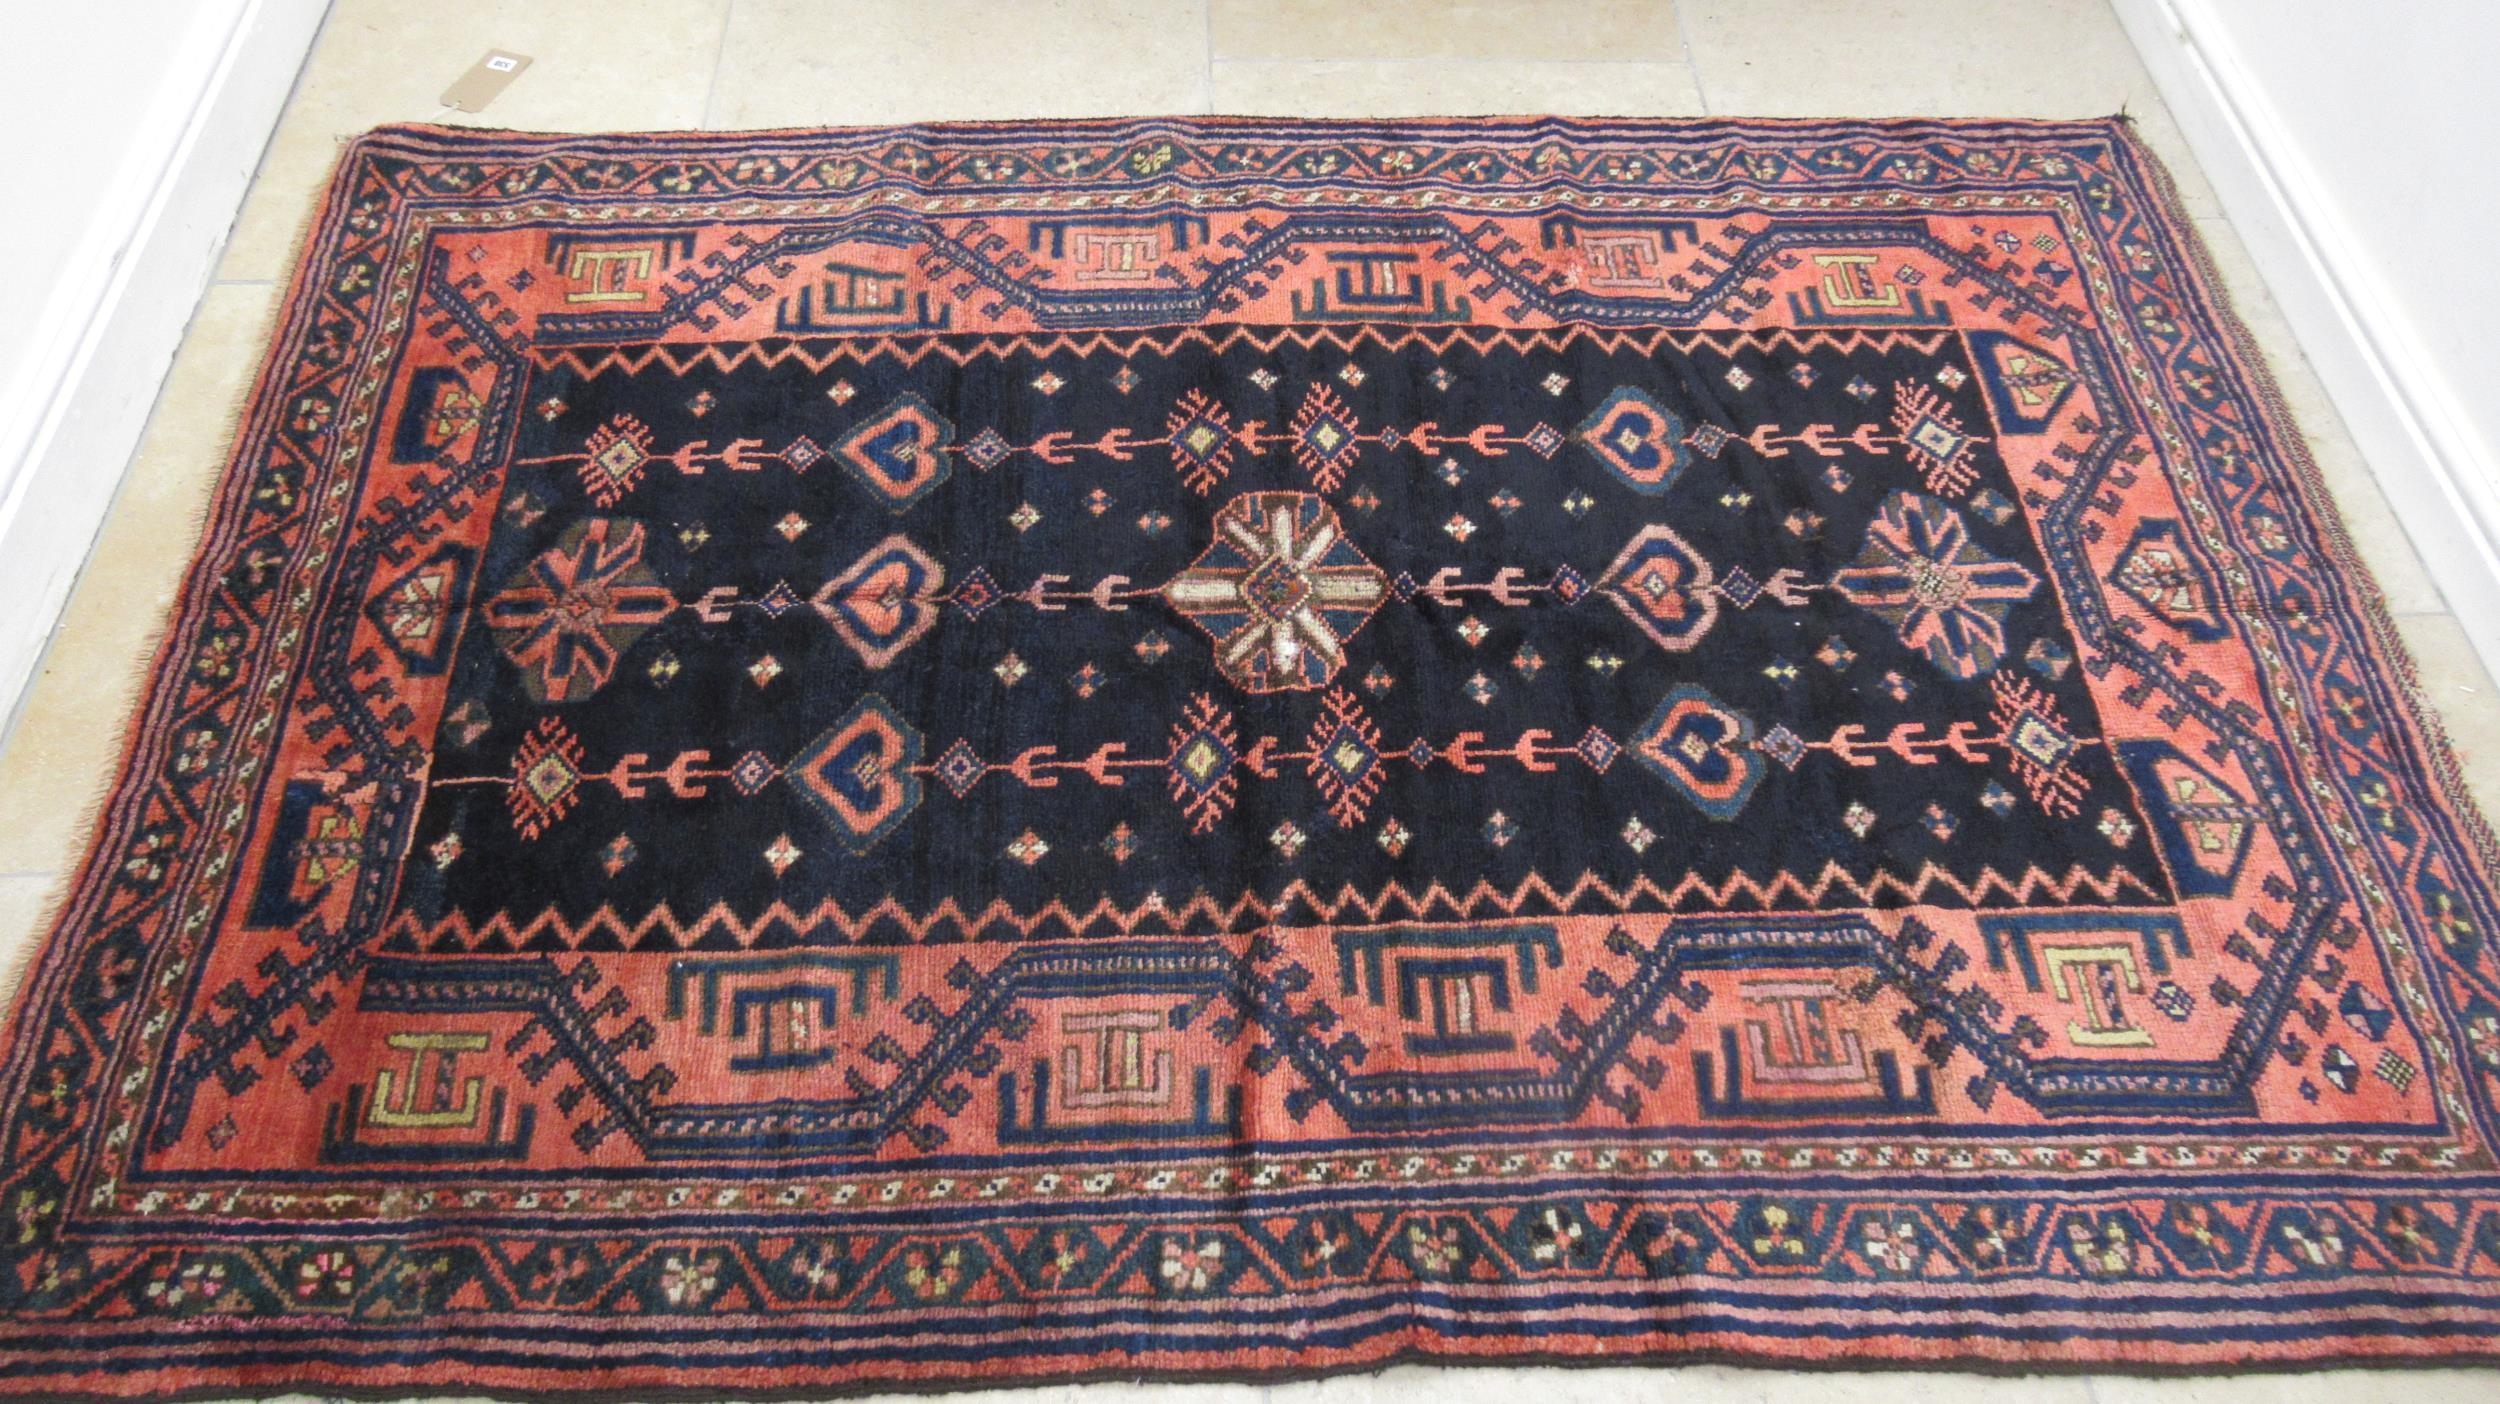 A hand knotted woollen Luri rug - 2.13m x 1.48m